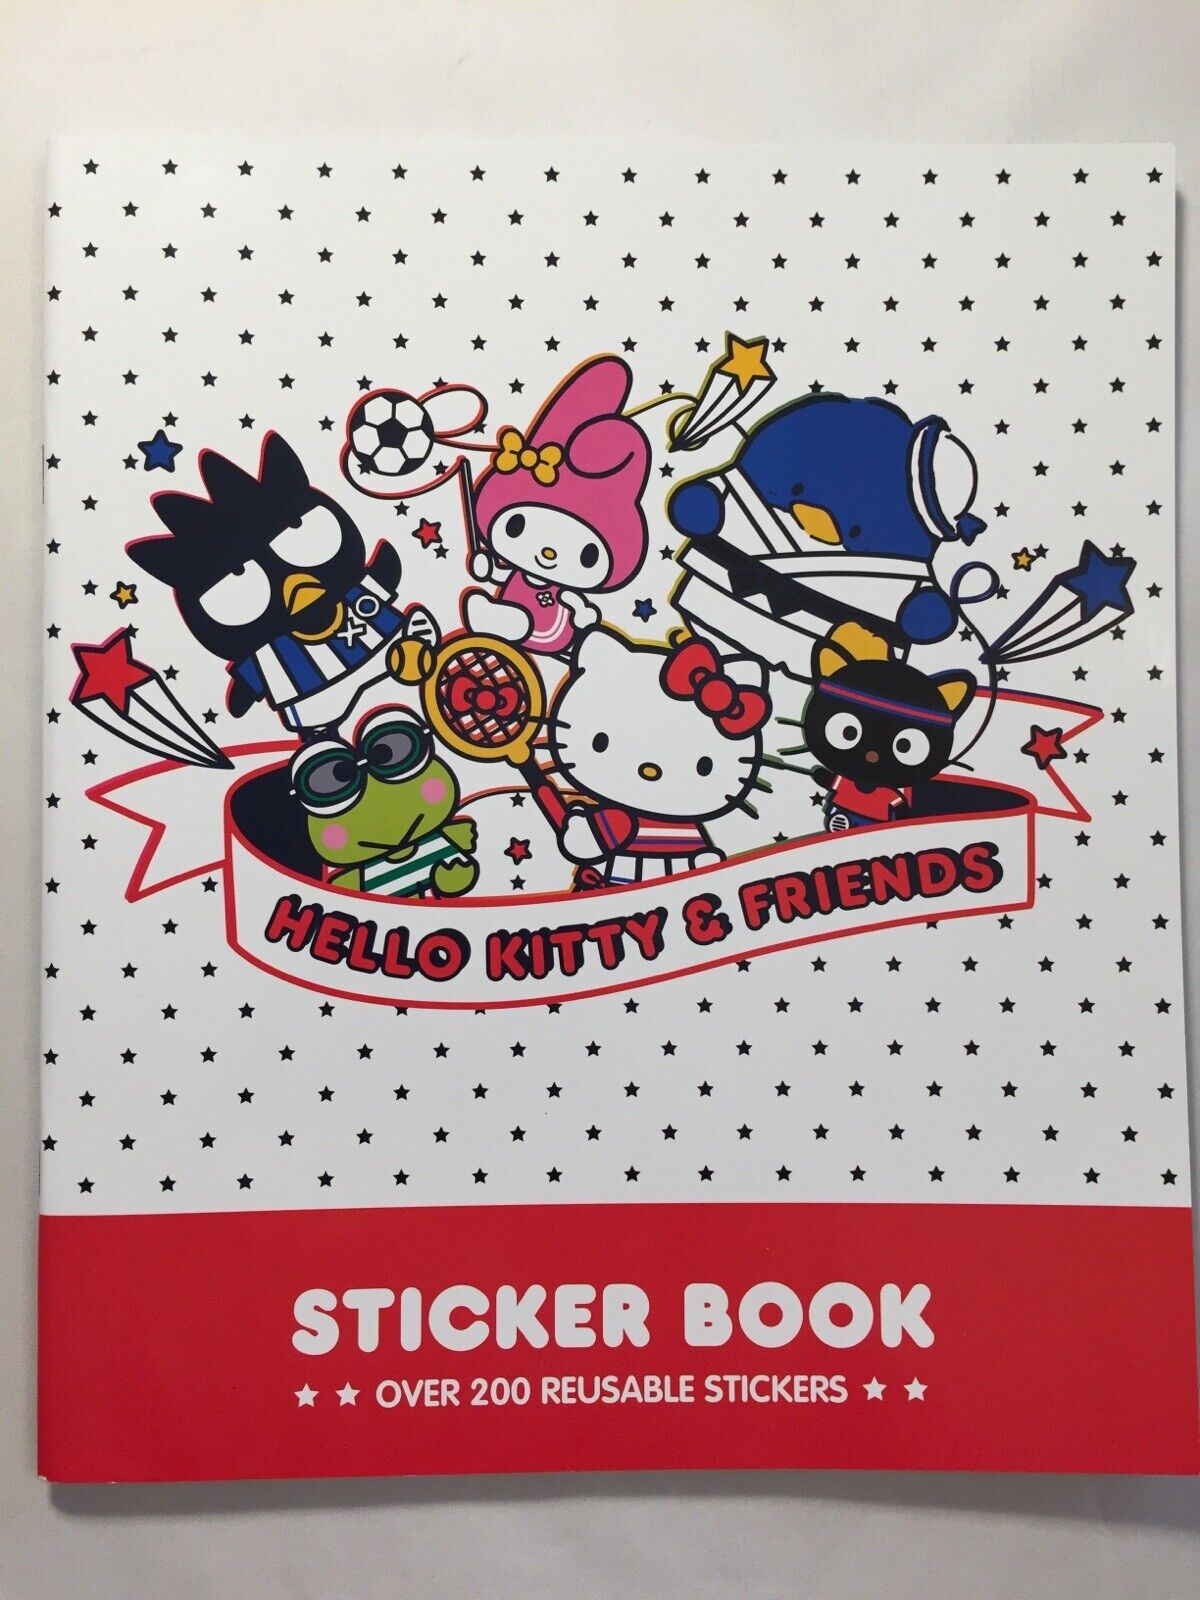 Hello Kitty & Friends Sports Sticker Book 200+ Reusable Stickers Cost Plus New